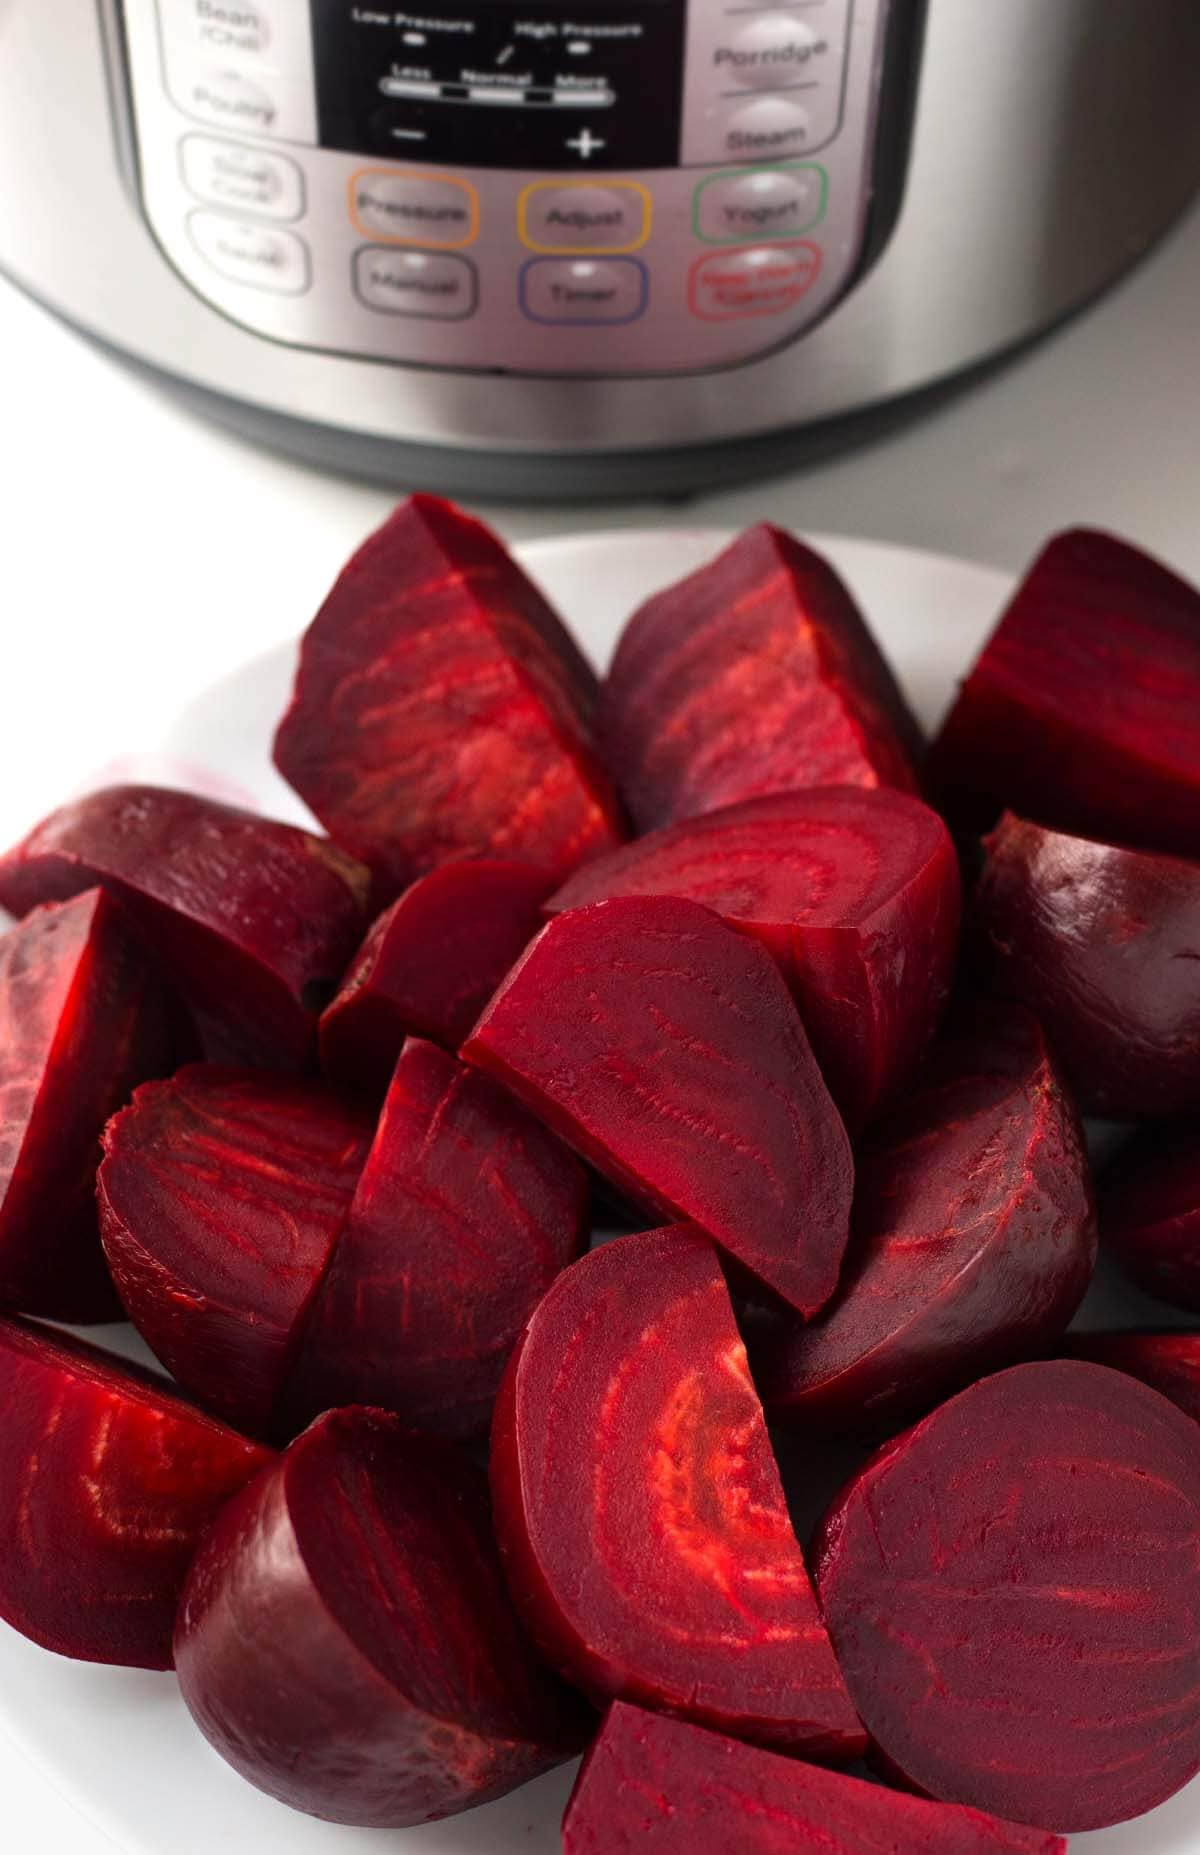 Cooked quartered instant pot beets on white plate with pressure cooker in the background.